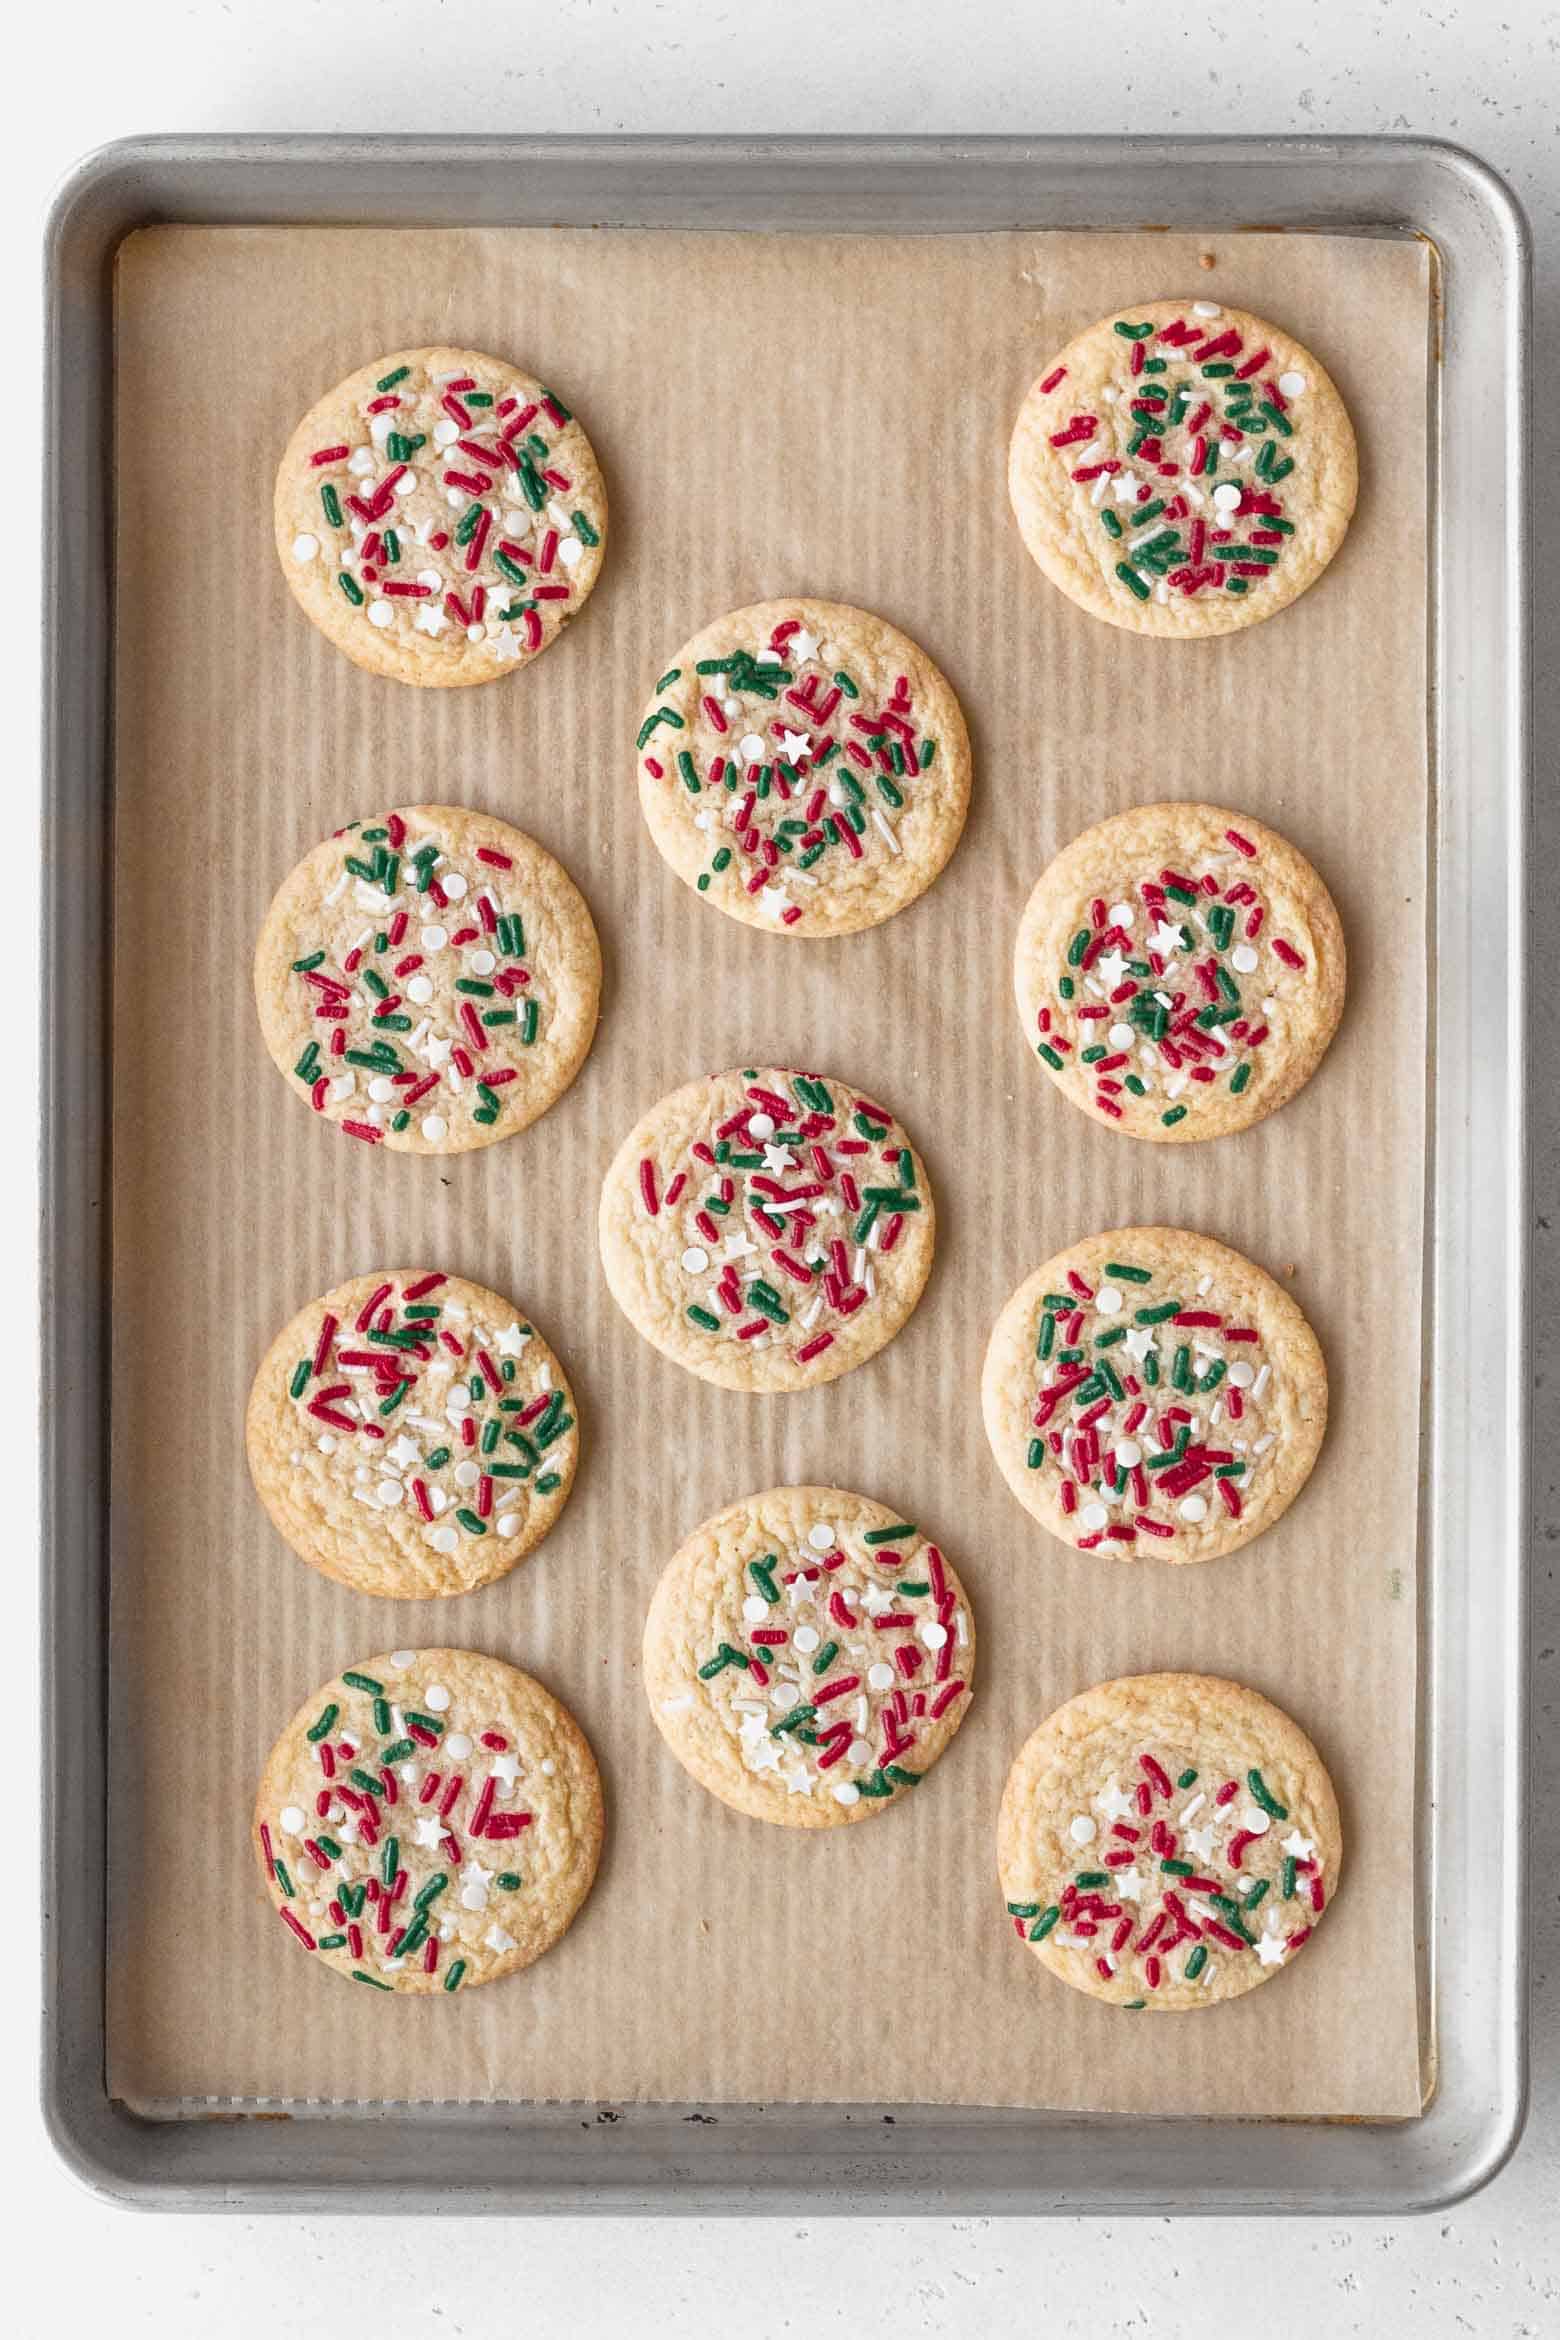 Baked Christmas cookies on a baking sheet.